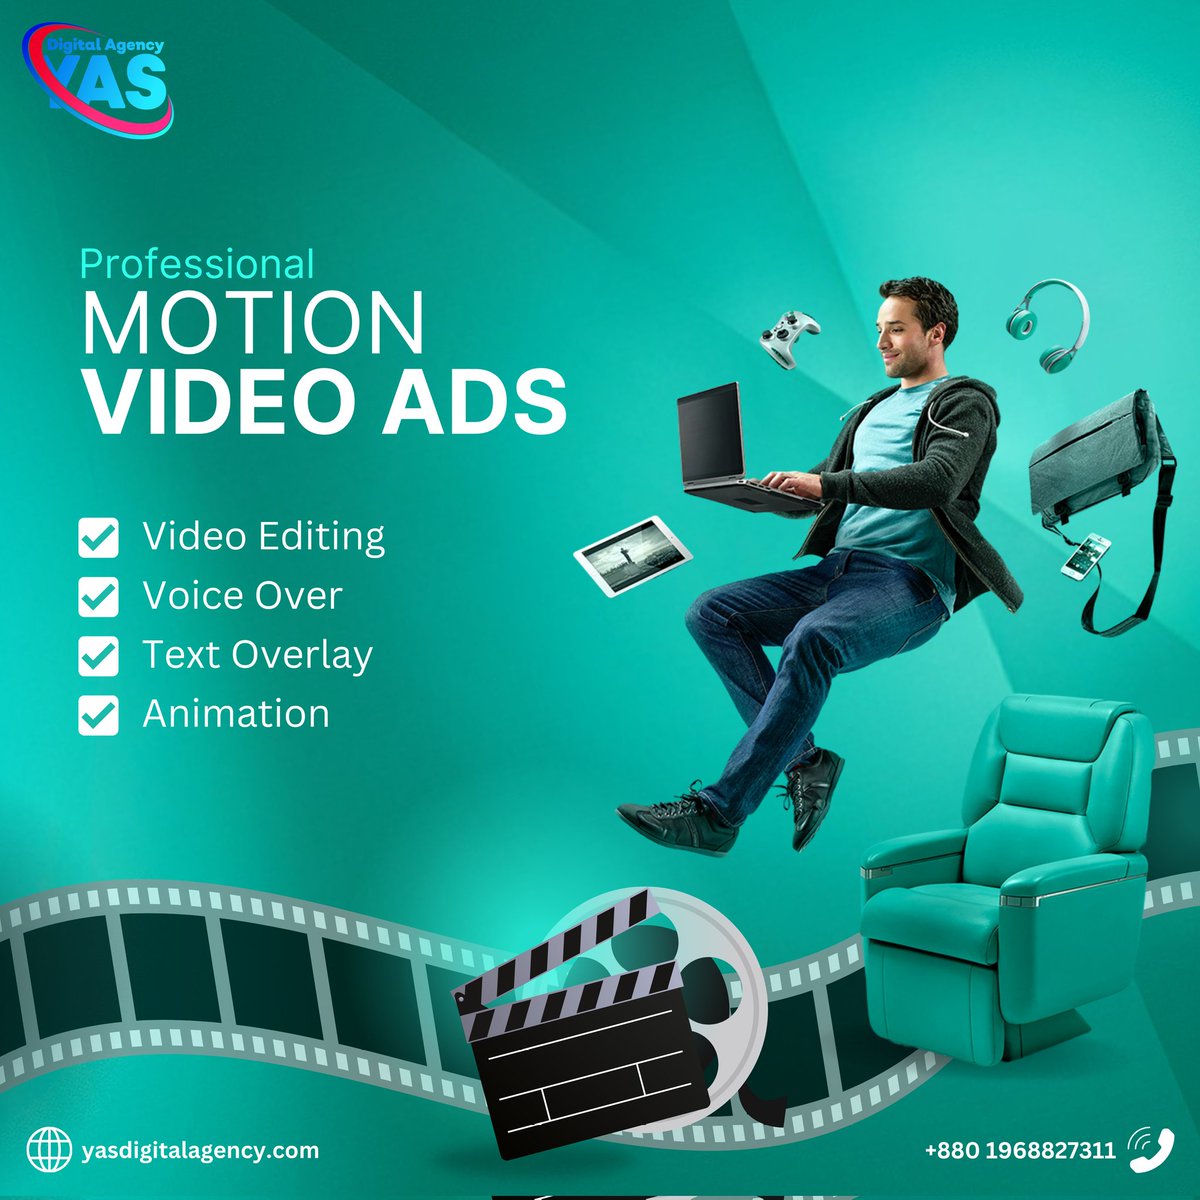 Step into the spotlight with mesmerizing motion graphics! 🎥✨ Elevate your brand's presence with captivating video ads that leave a lasting impression. 

🌐 Website: yasdigitalagency.com

#MotionGraphics #VideoAds #StandOut #motionislotion  #motiondesign #yasdigitalagency